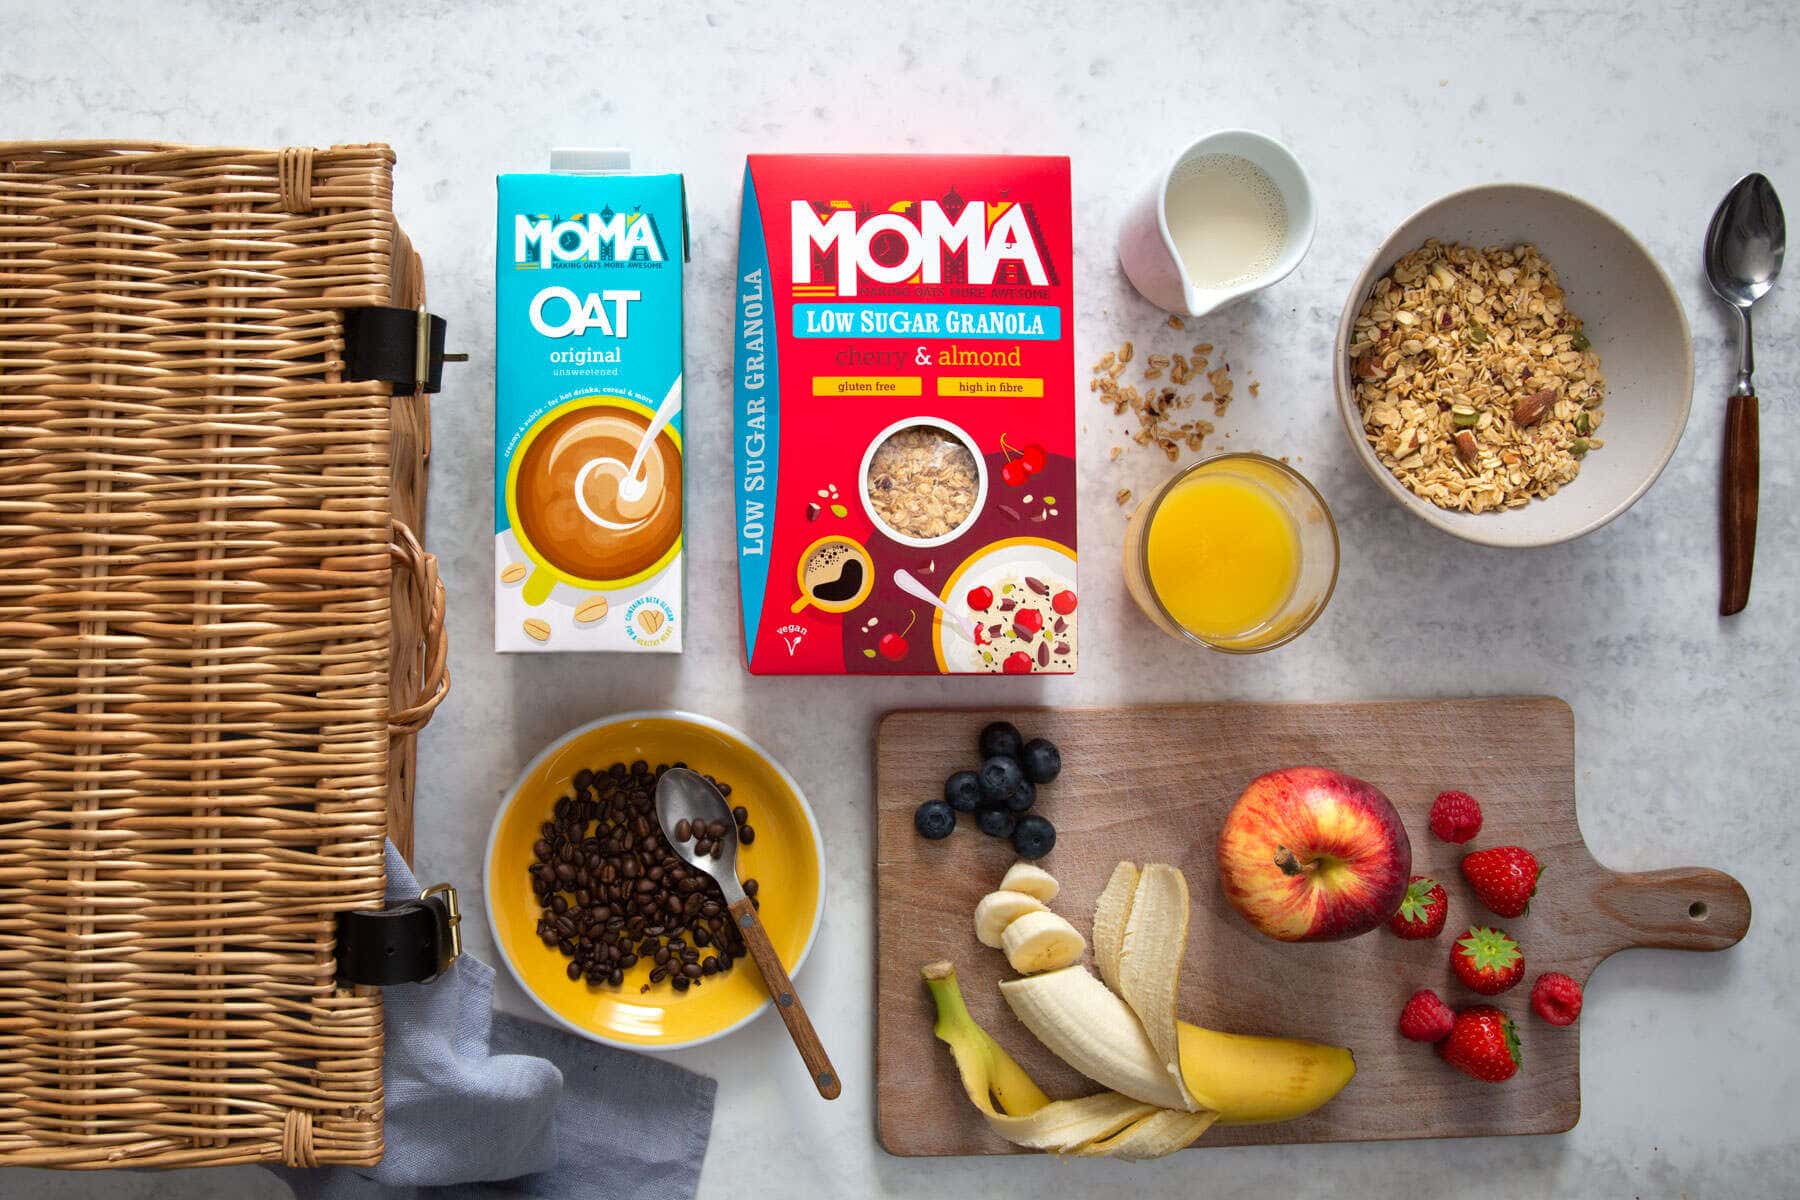 Moma food porridge and Oat milk with an assortment of breakfast condiments next to a picnic hamper